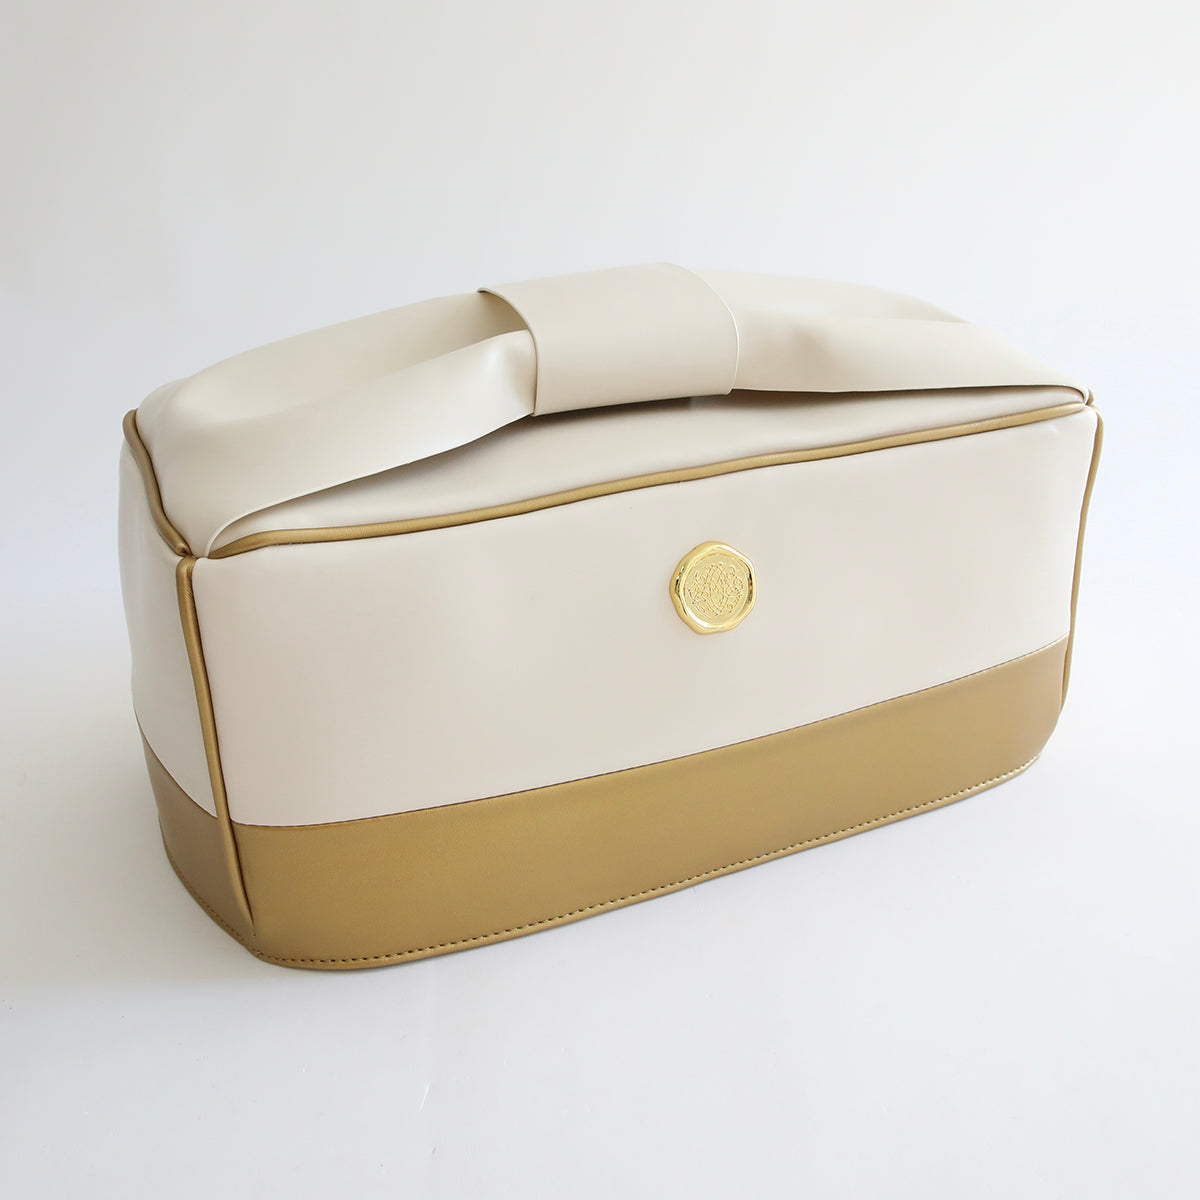 An Empress Tote and Dust Cover with a dust cover on a white surface.